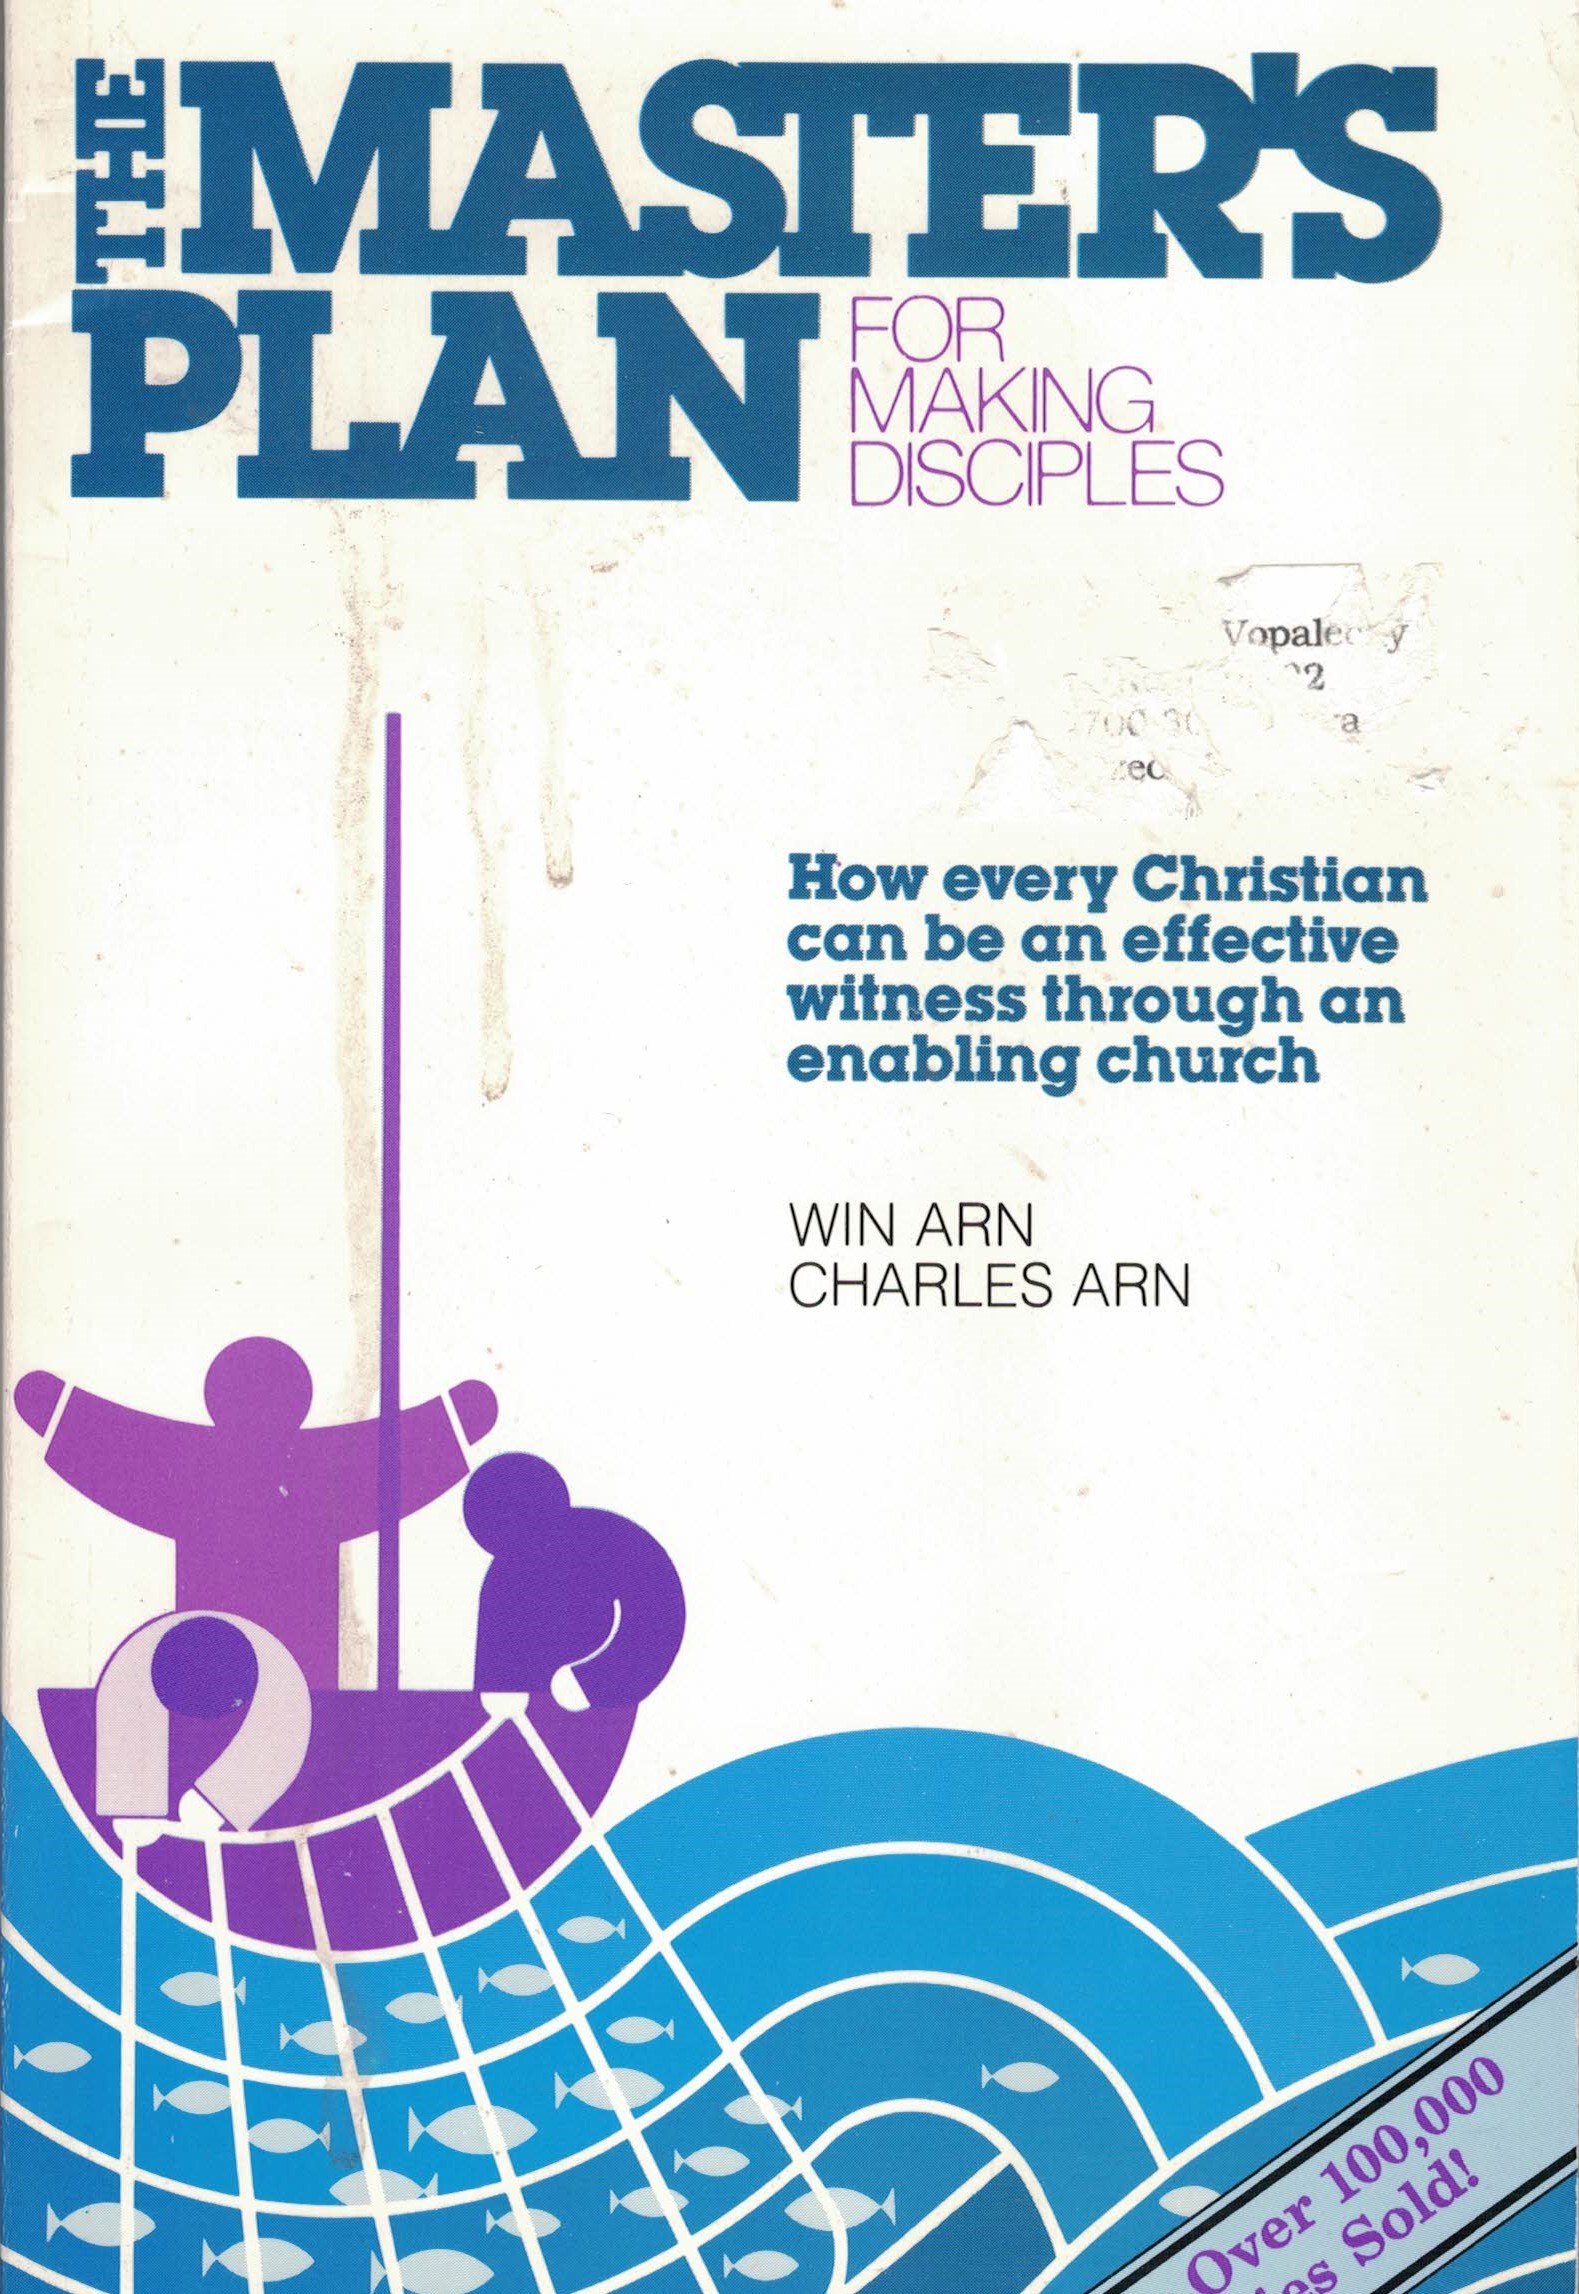 The Master's Plan for Making Disciples